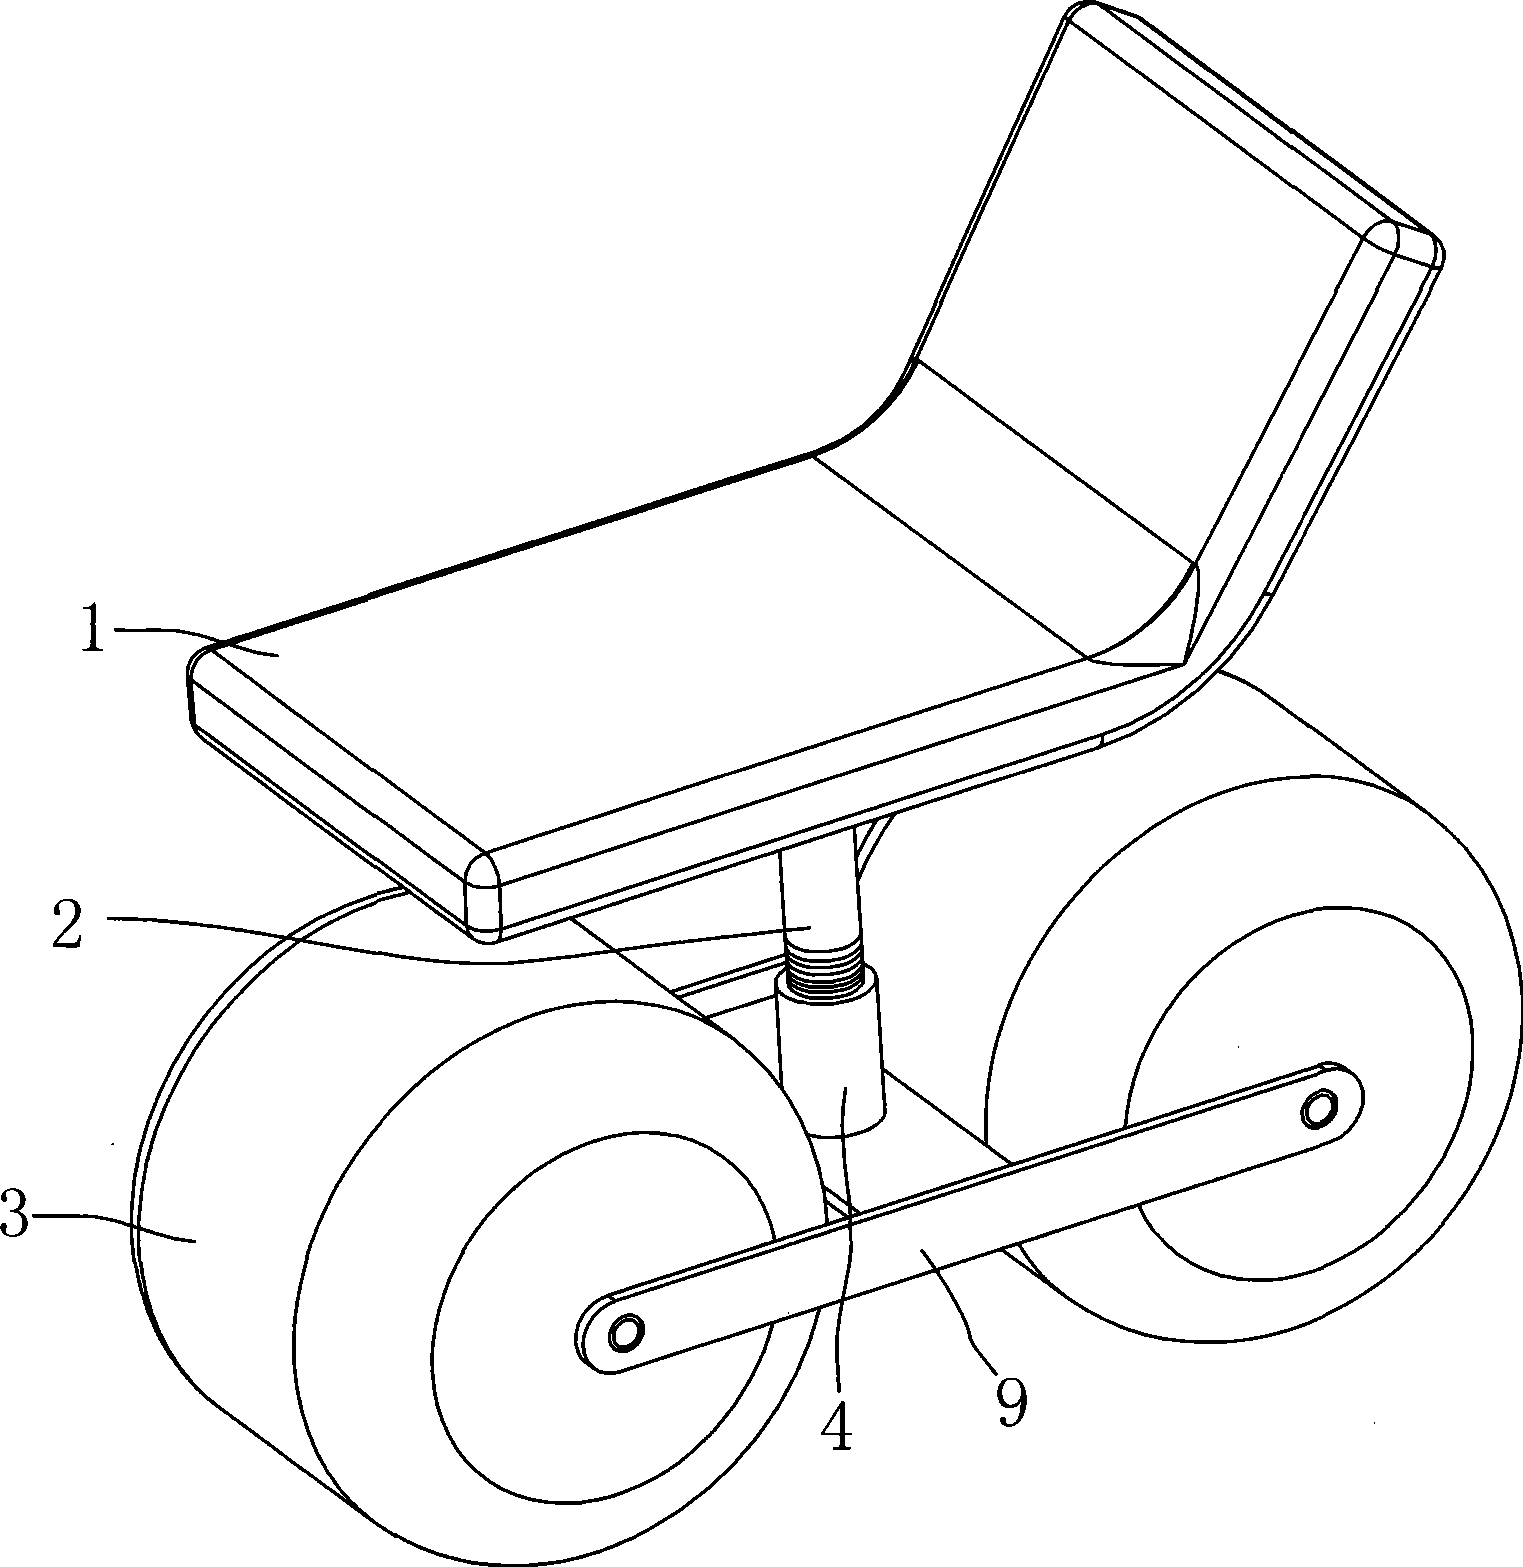 Agricultural trolley